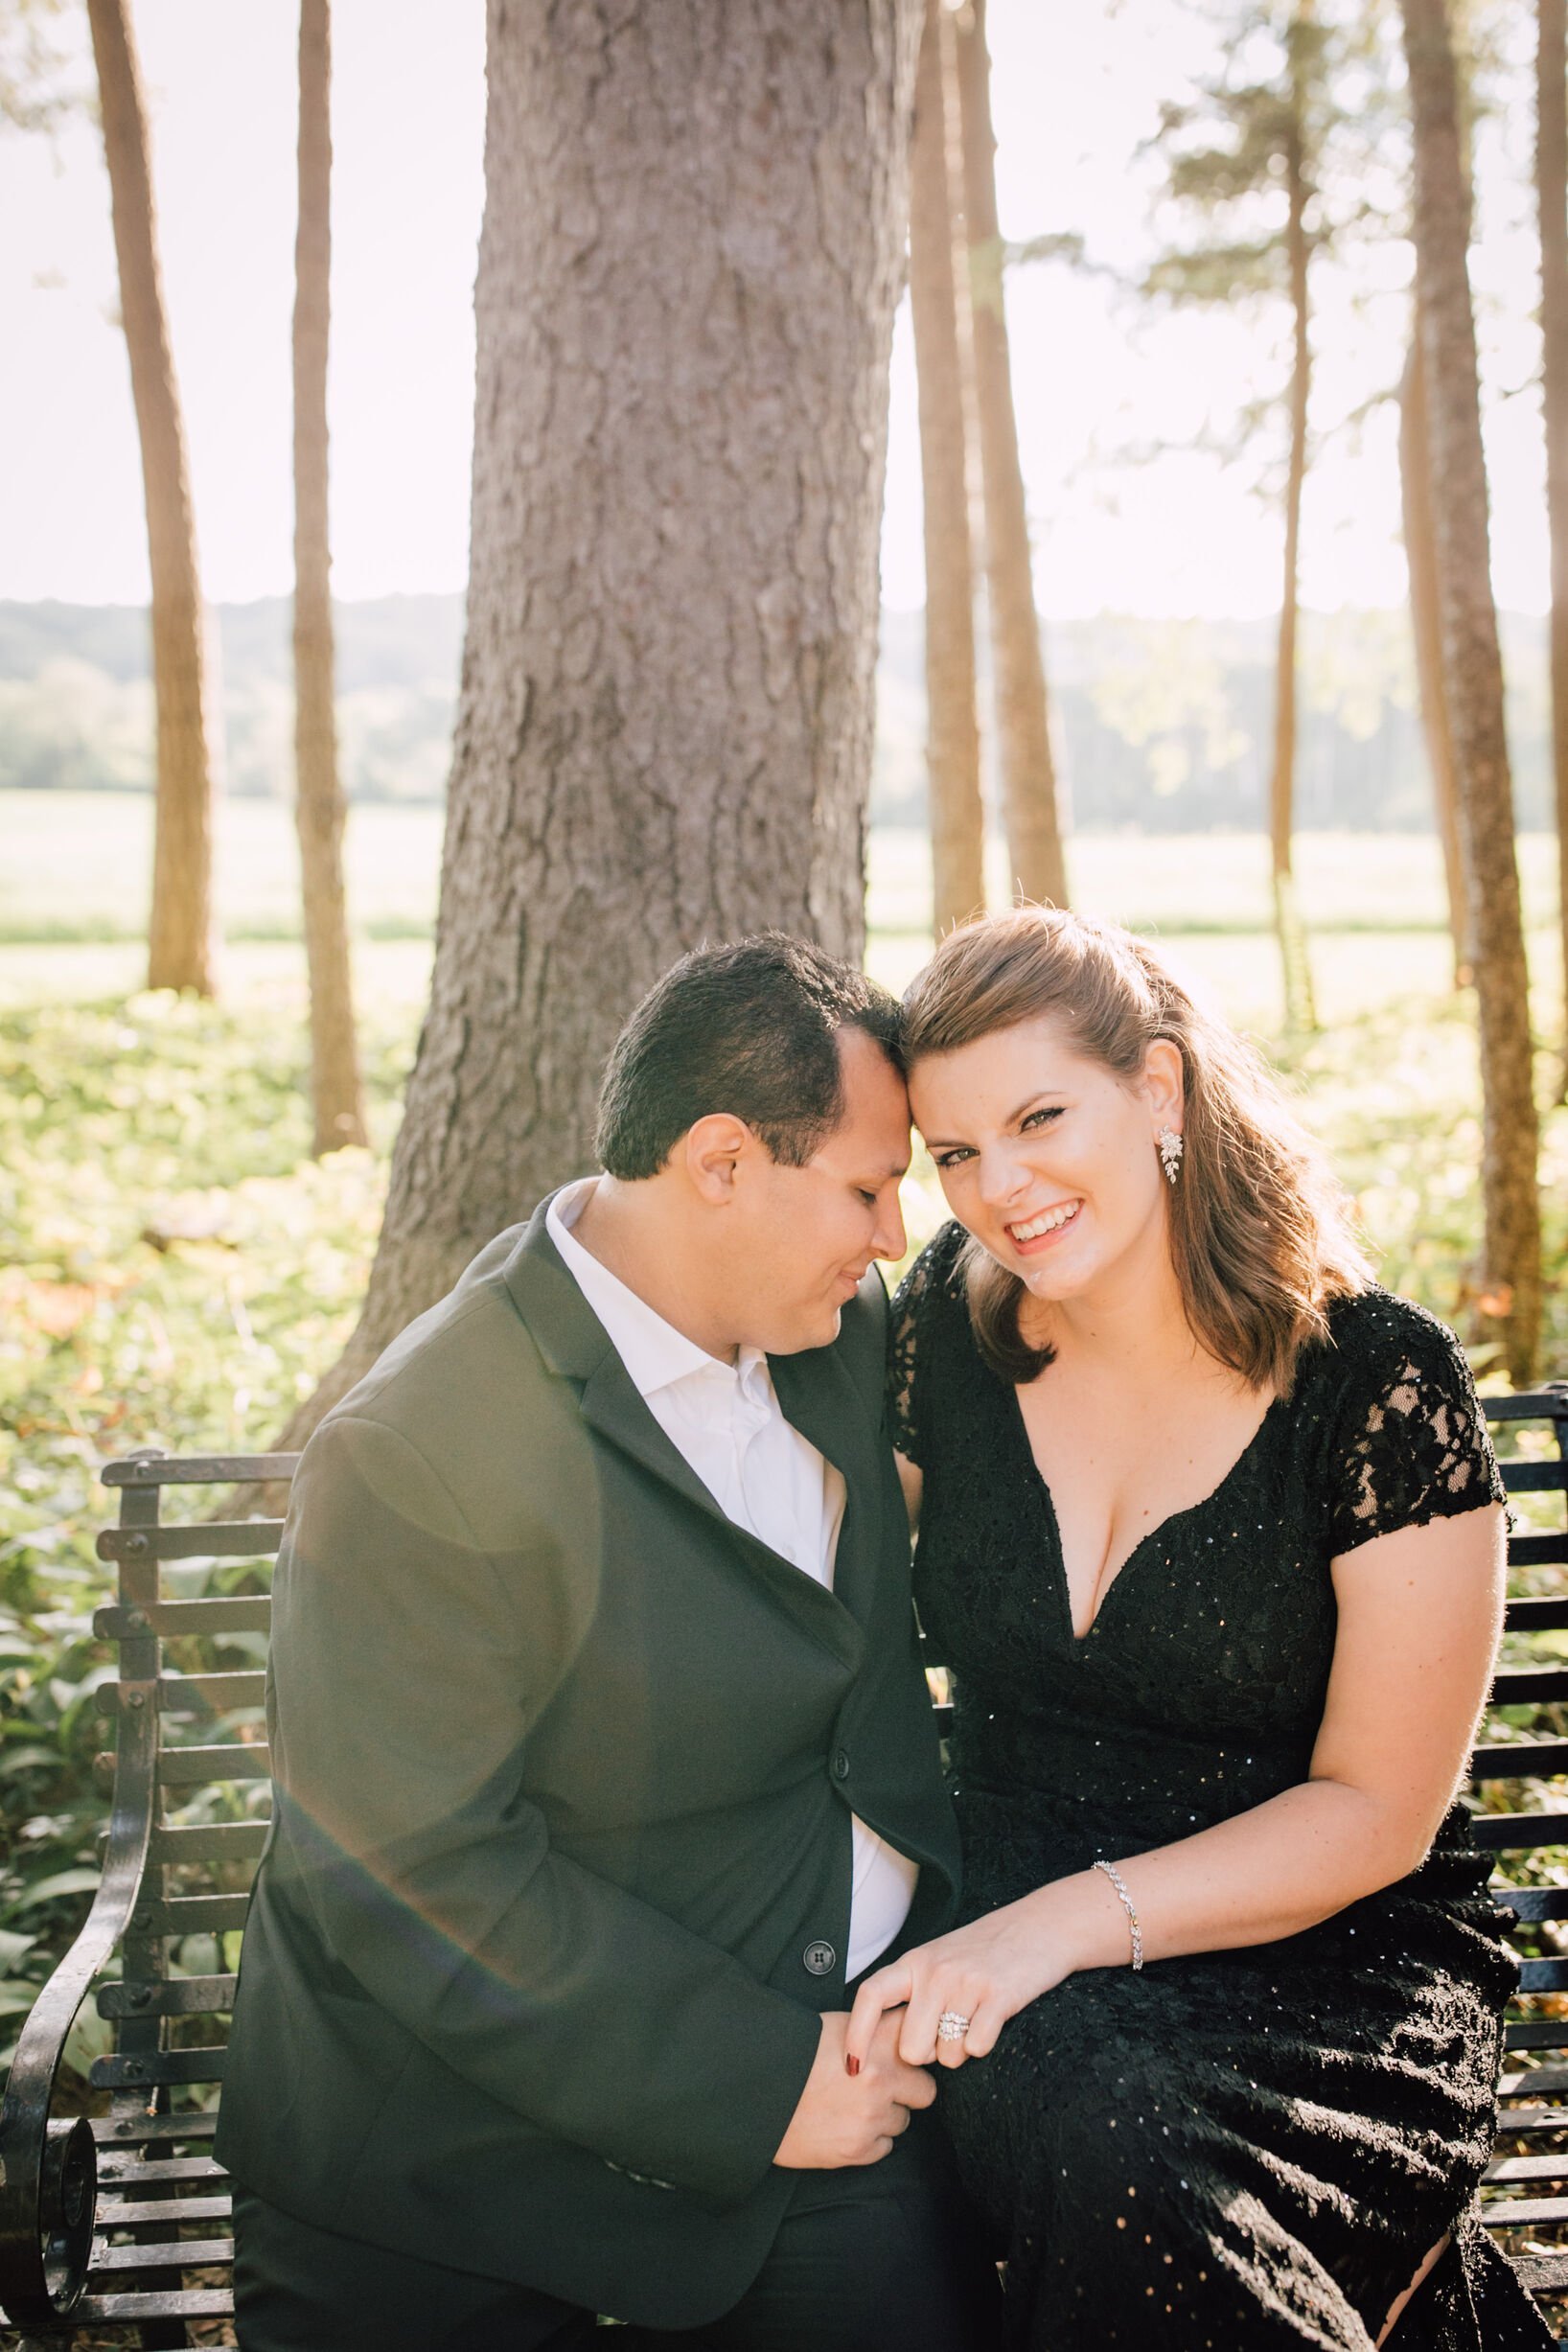  a married couple sit together on a bench in the wood for their first anniversary photos 